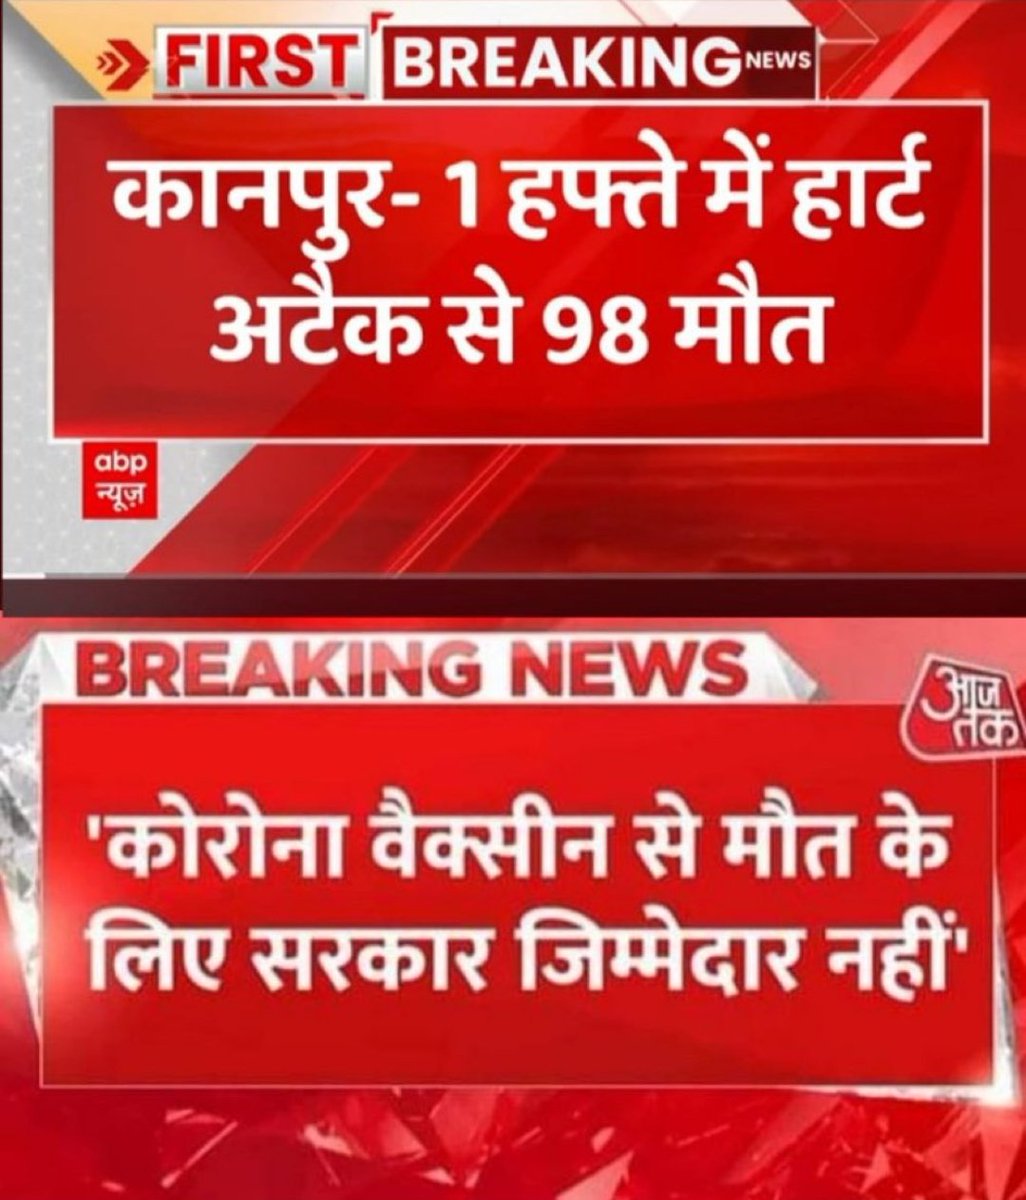 This is our Godi media. They said government is not responsible for the death of people in kanpur due to covid vaccine. That's why Dhruv Rathee is right.